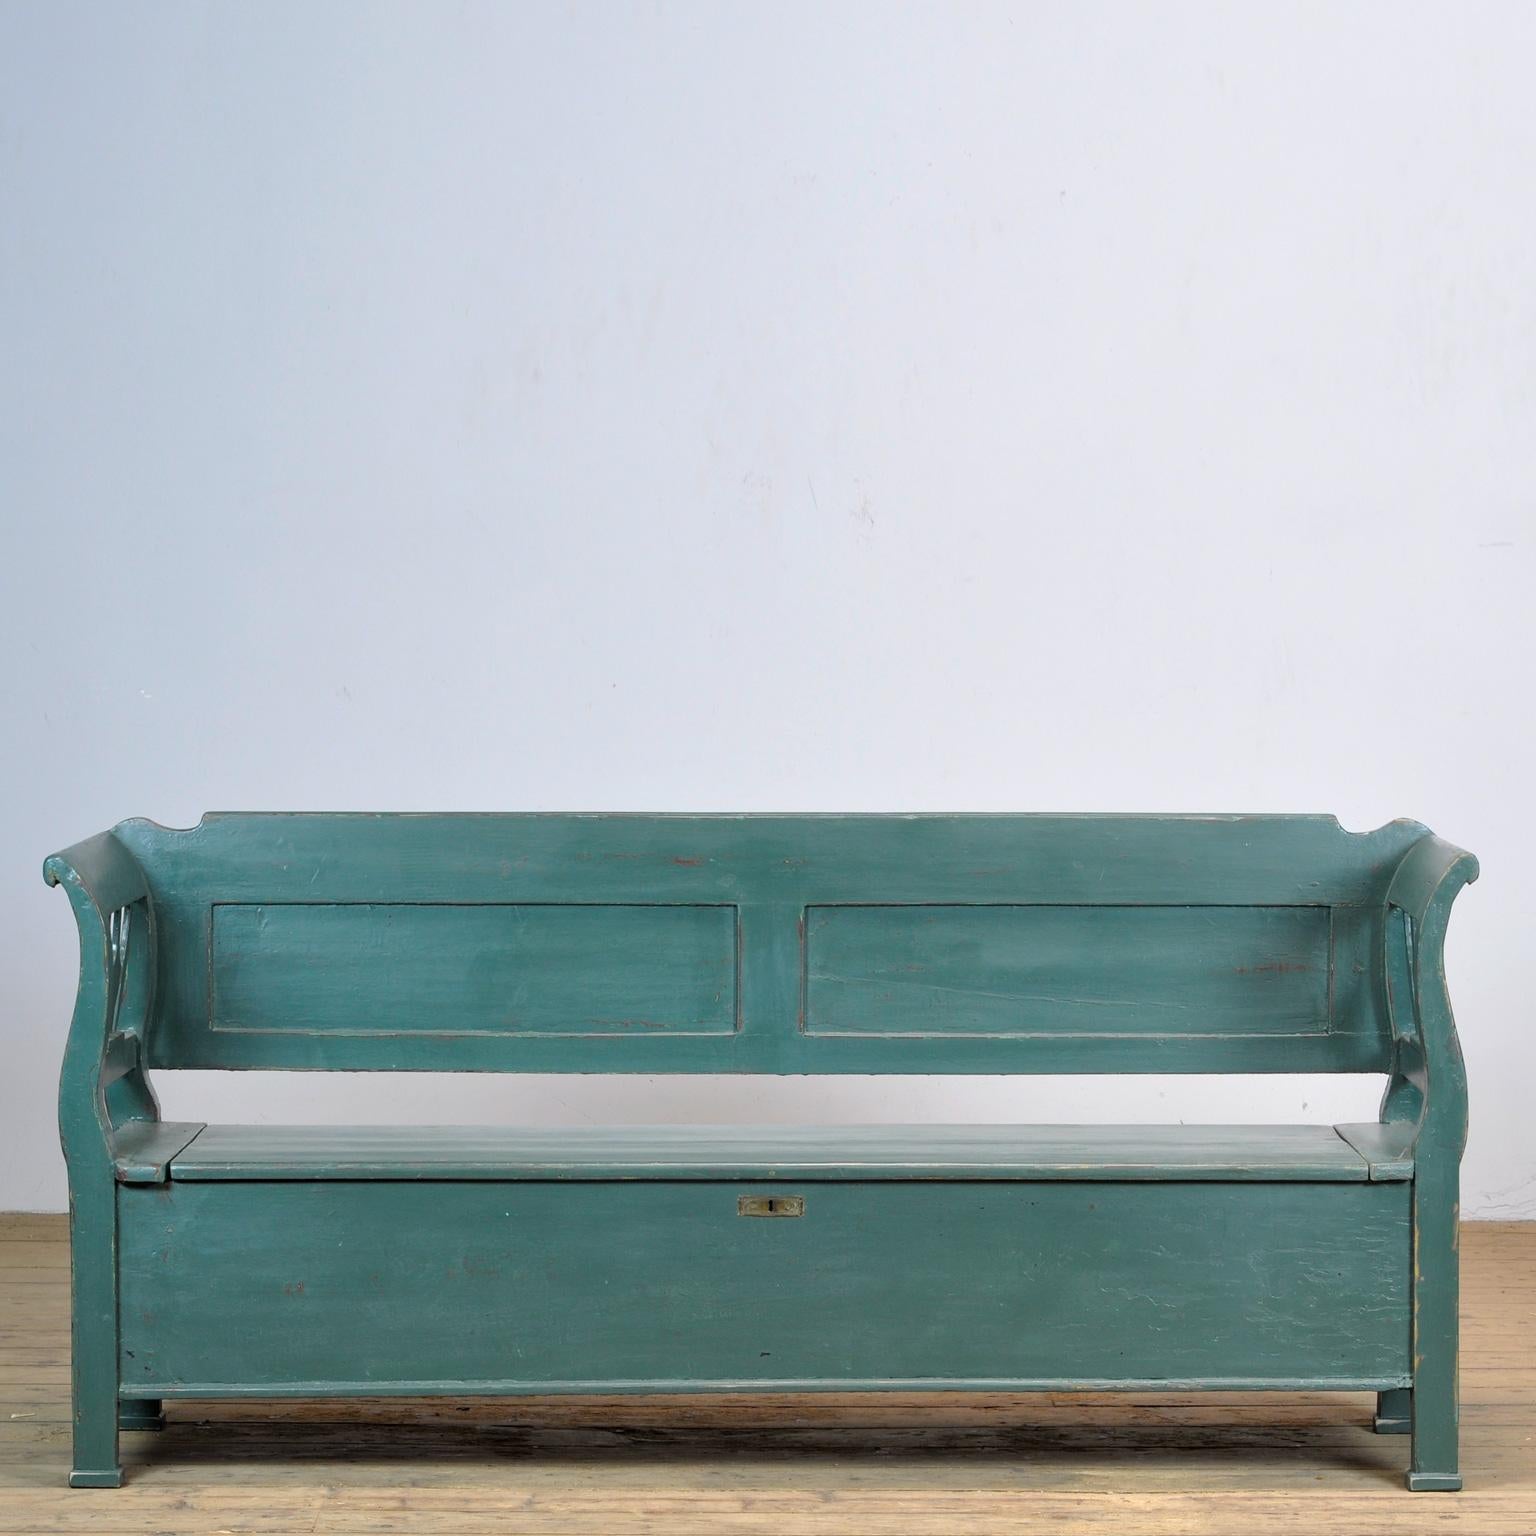 A charming bench from hungary made from pine. Over time and use, the bench has been repainted several times, which gives it character The bench is stable and sturdy. Free of woodworm.